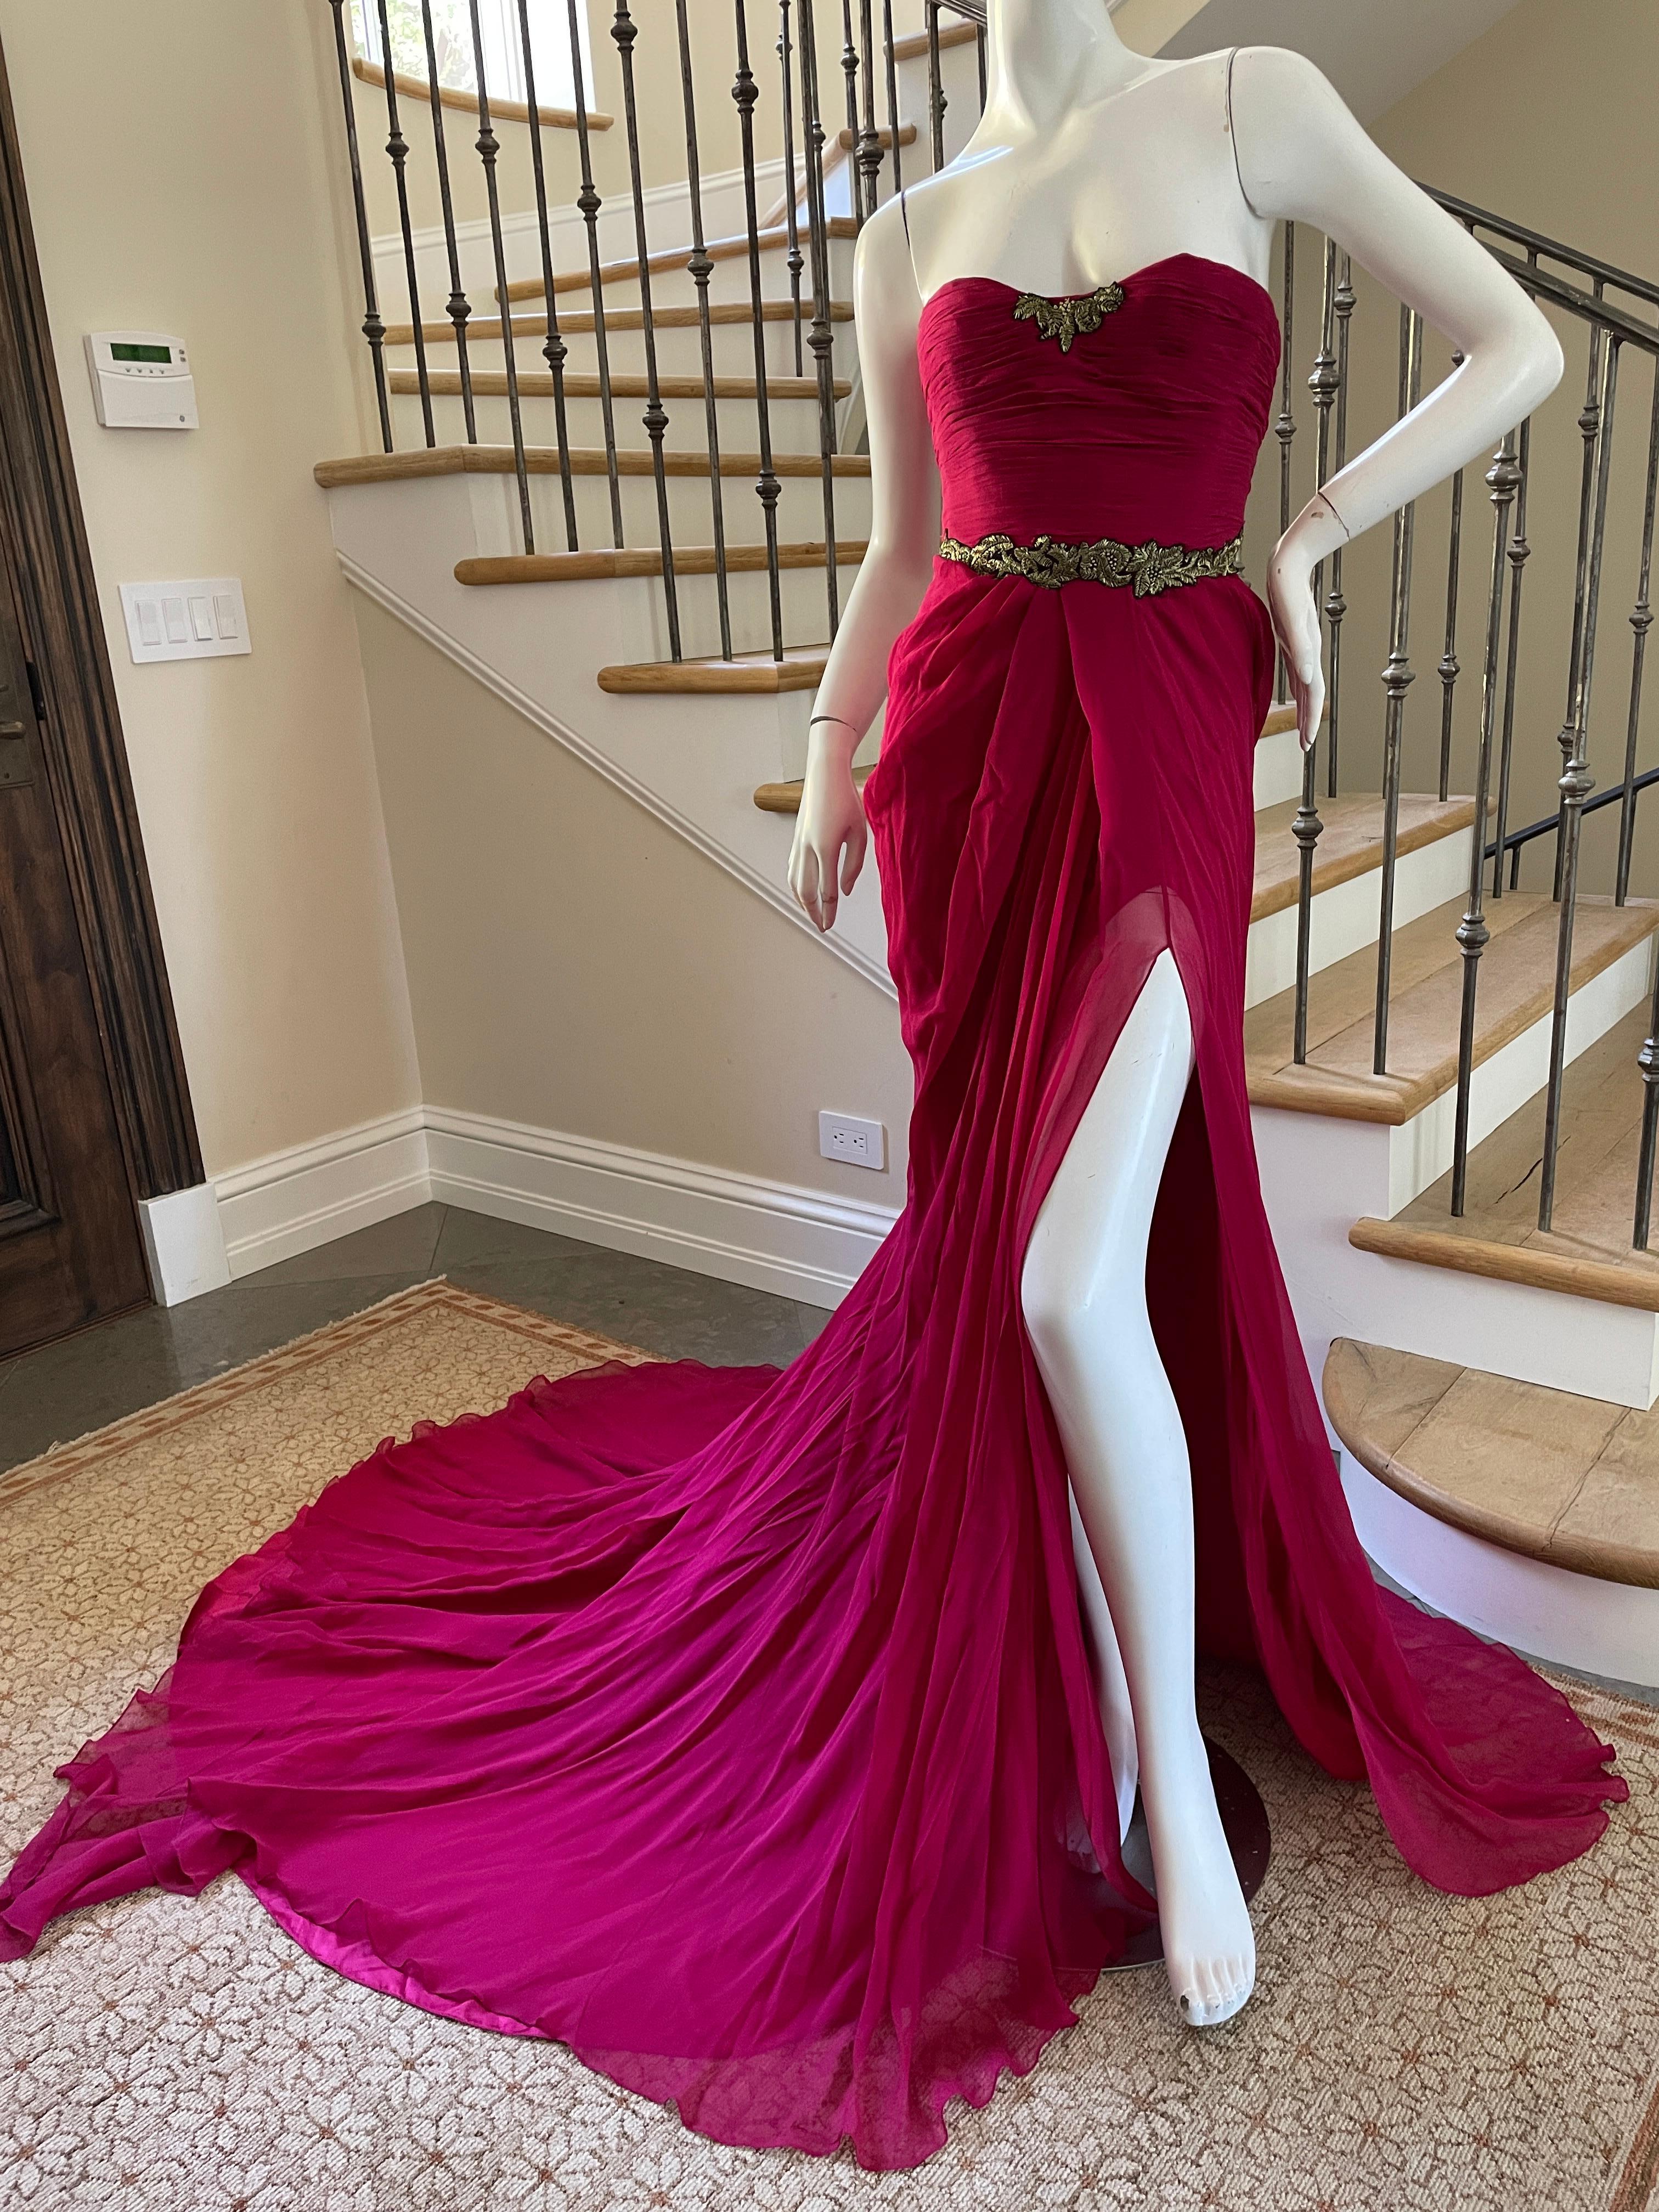 Jason Wu Spring 2011 Dramatic Strapless Red Evening Dress with Train In Excellent Condition For Sale In Cloverdale, CA